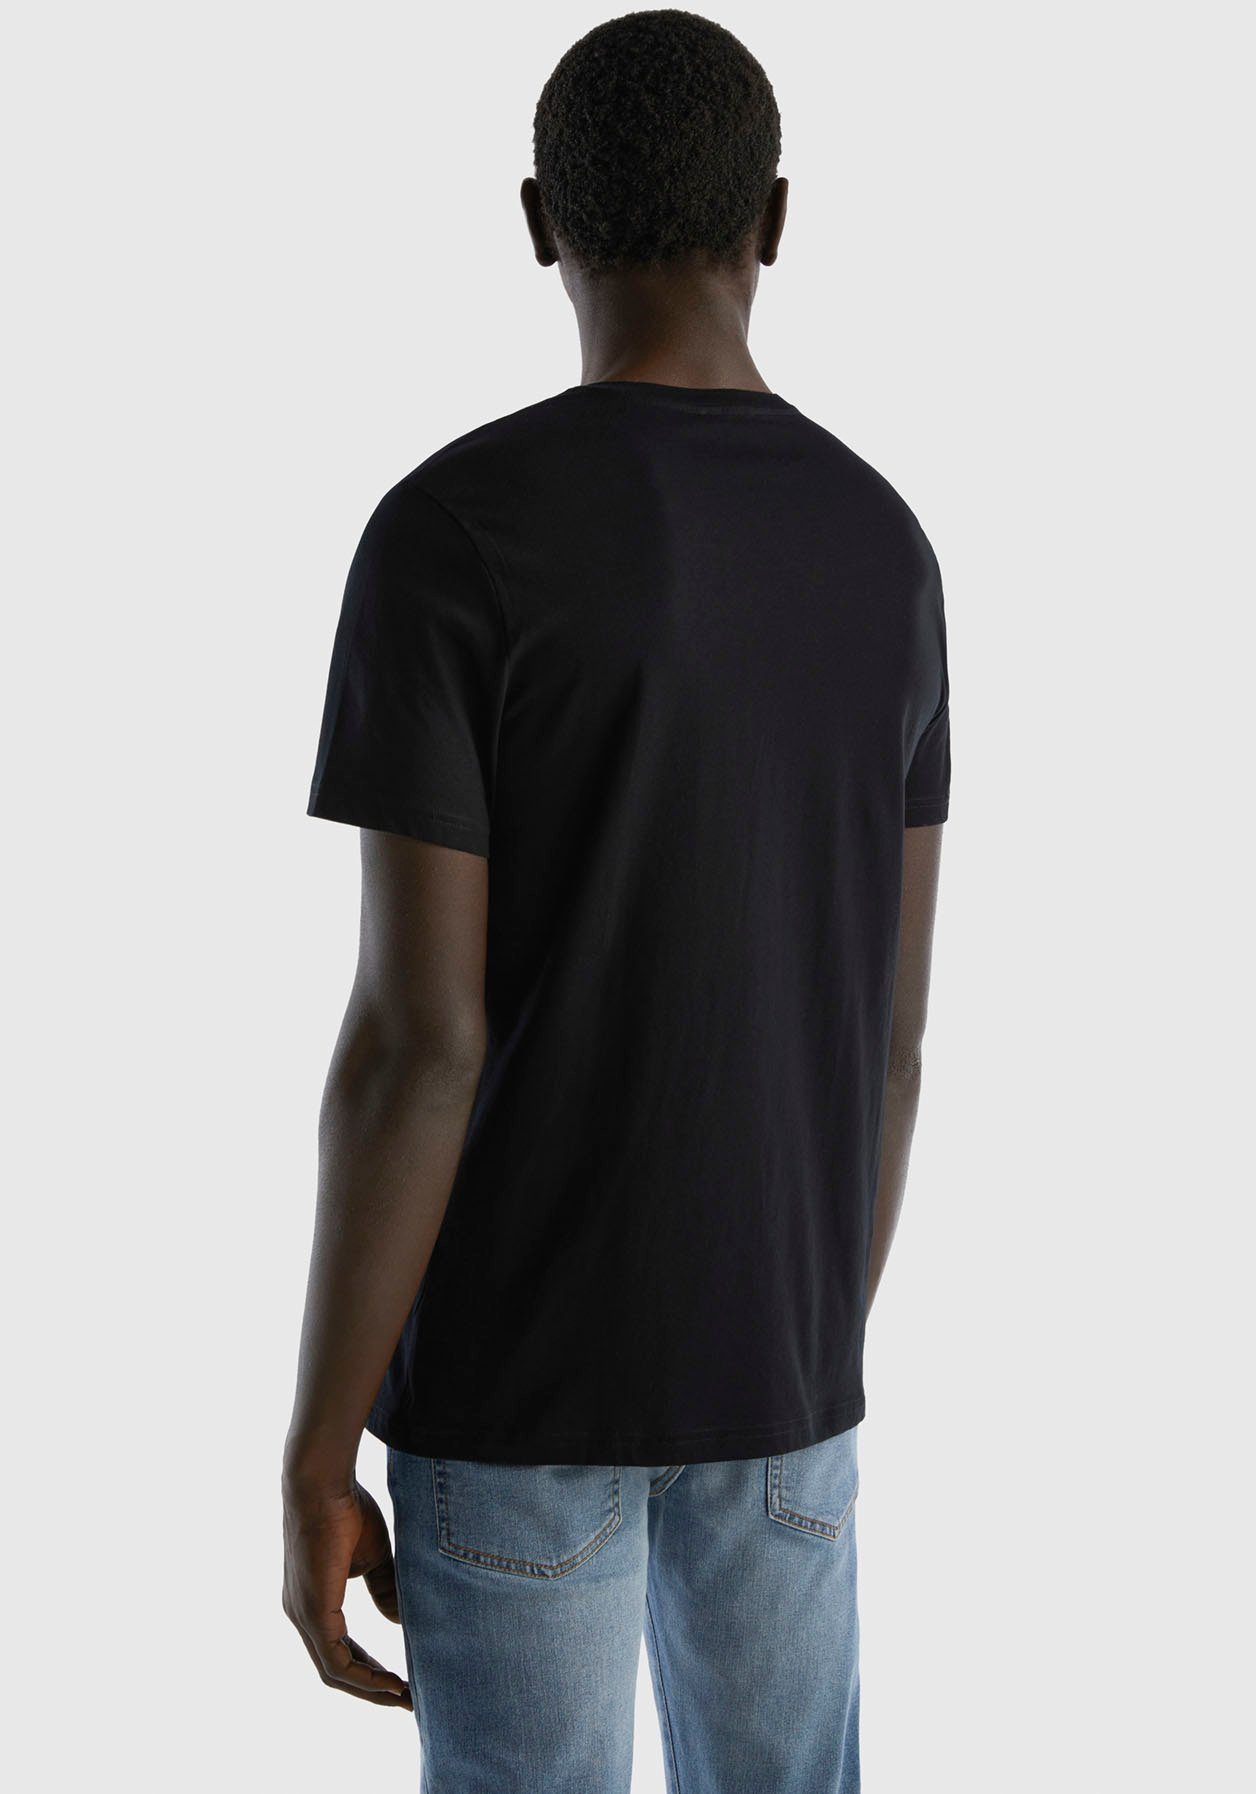 United Colors of Benetton T-Shirt in cleaner Basic-Form schwarz | V-Shirts